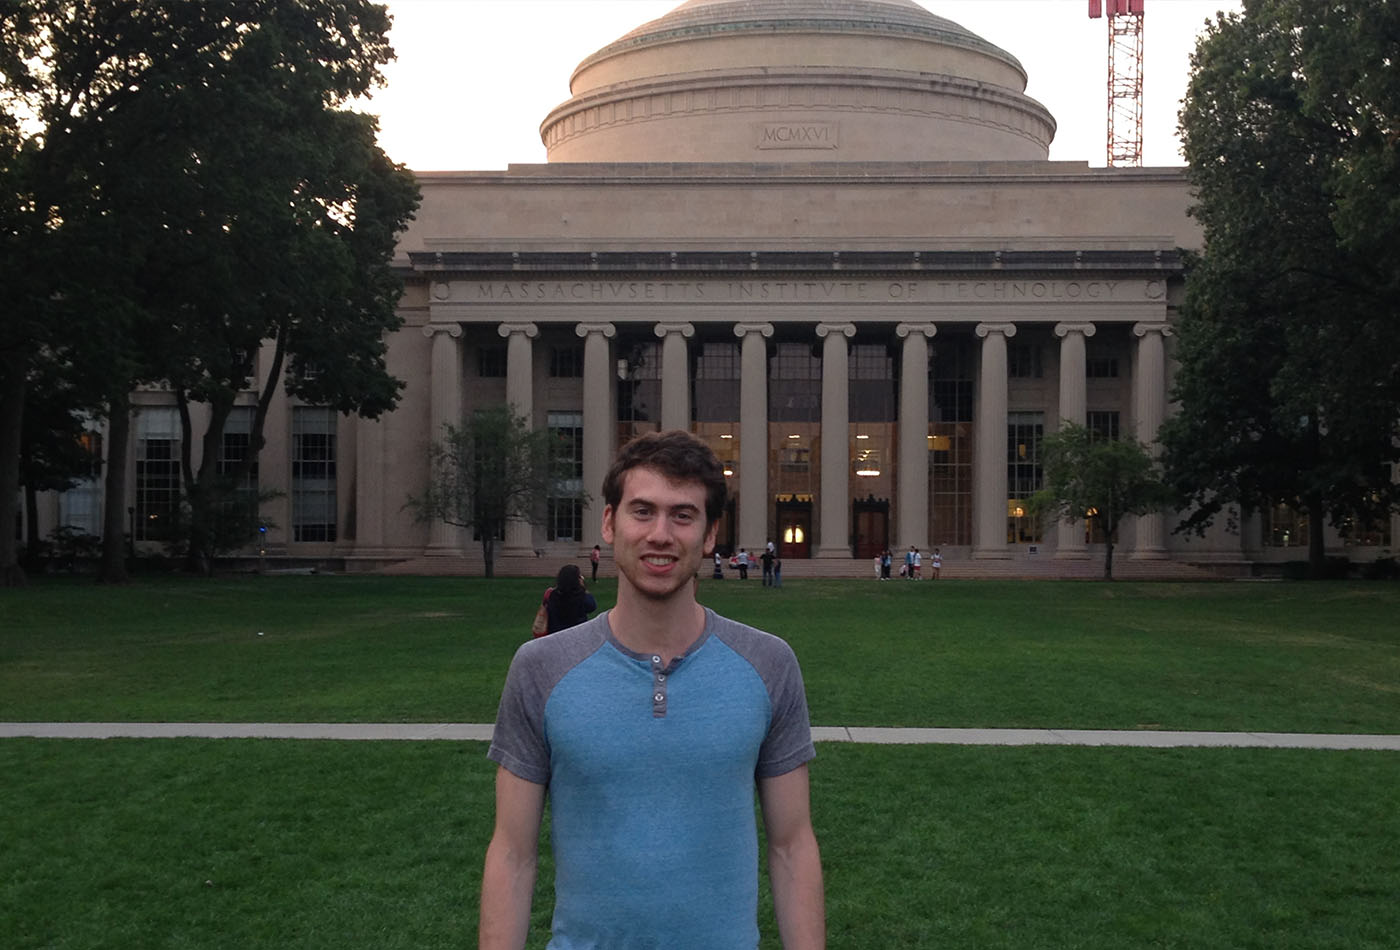 A man stands in front of the MIT dome.